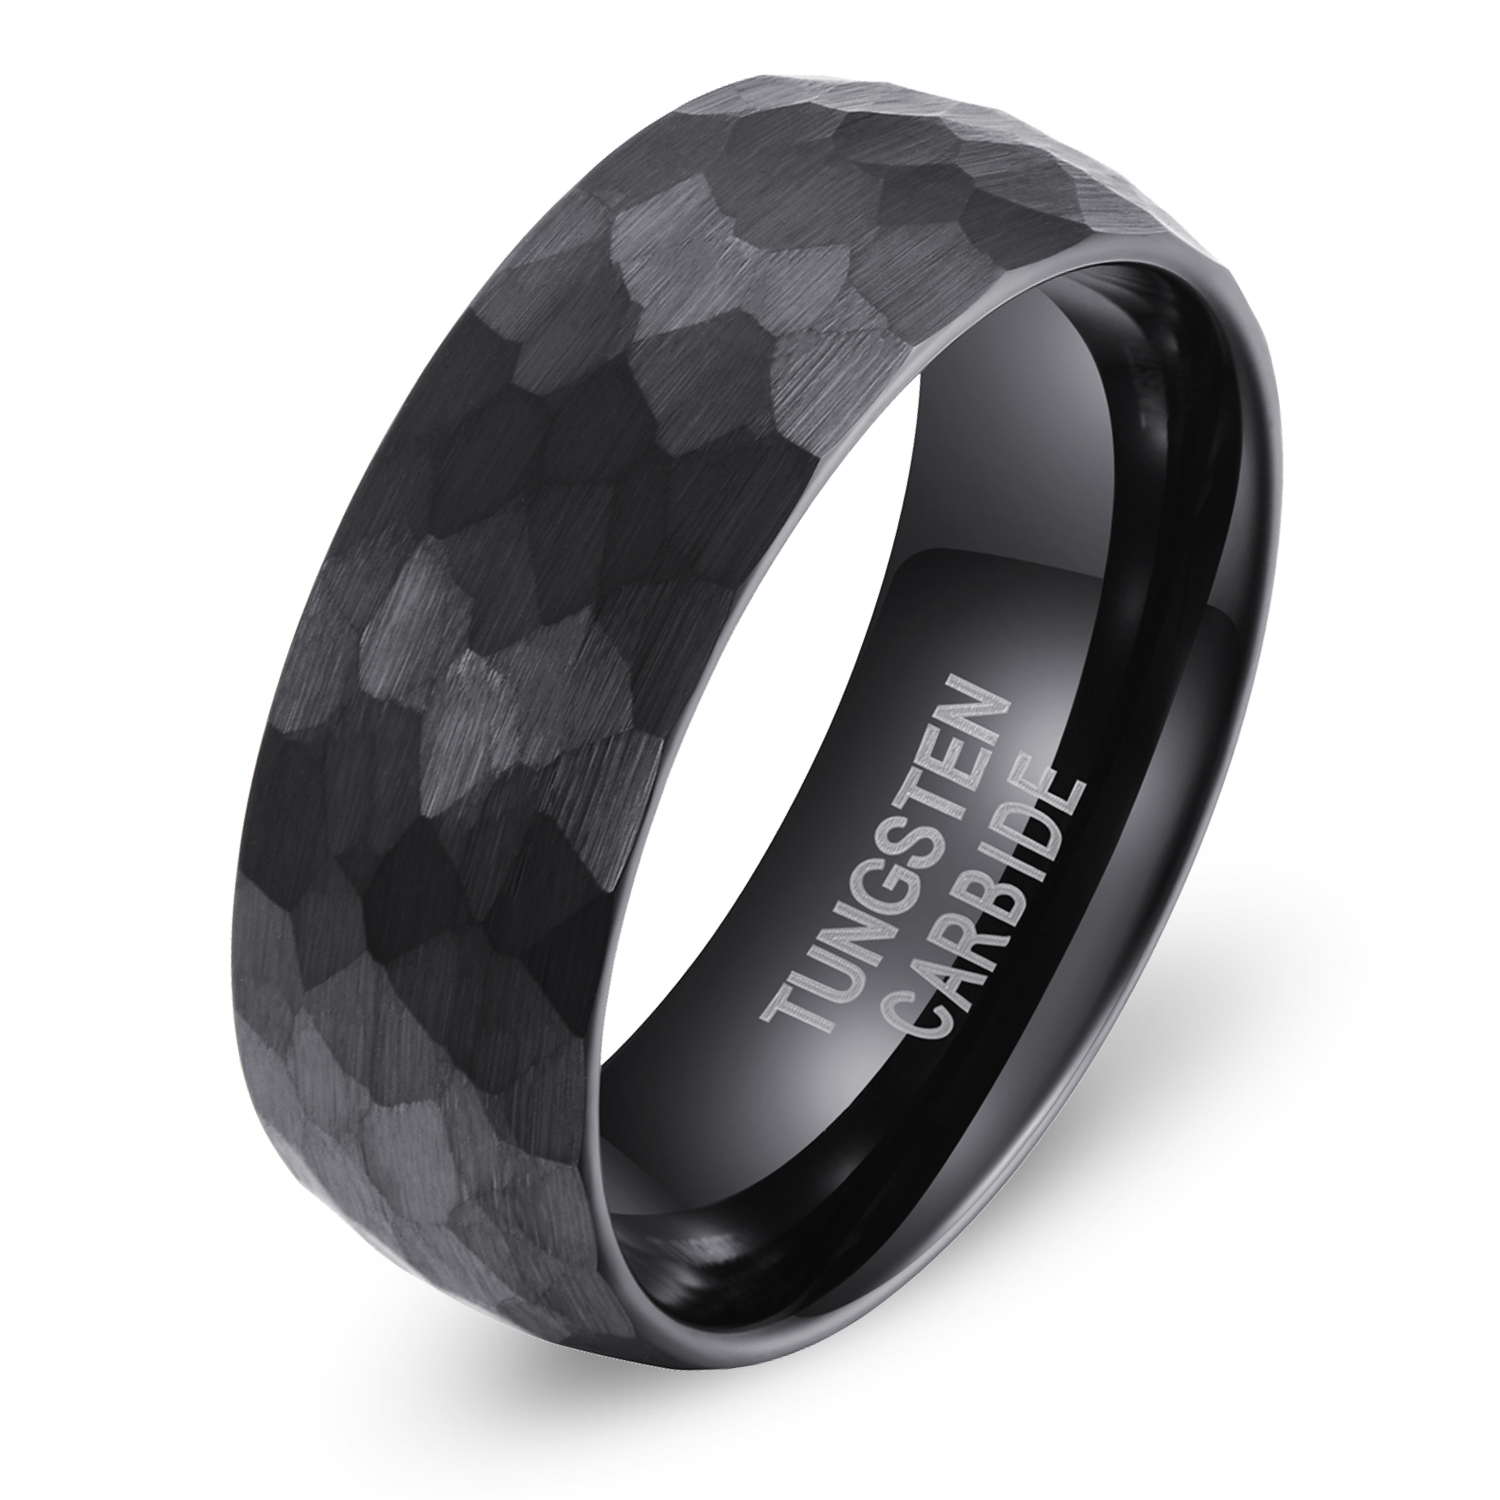 Best Selling Fashion Jewelry China Thrashing 8mm Tungsten Ring Black Carbon Fiber Rings For Men Featured Image